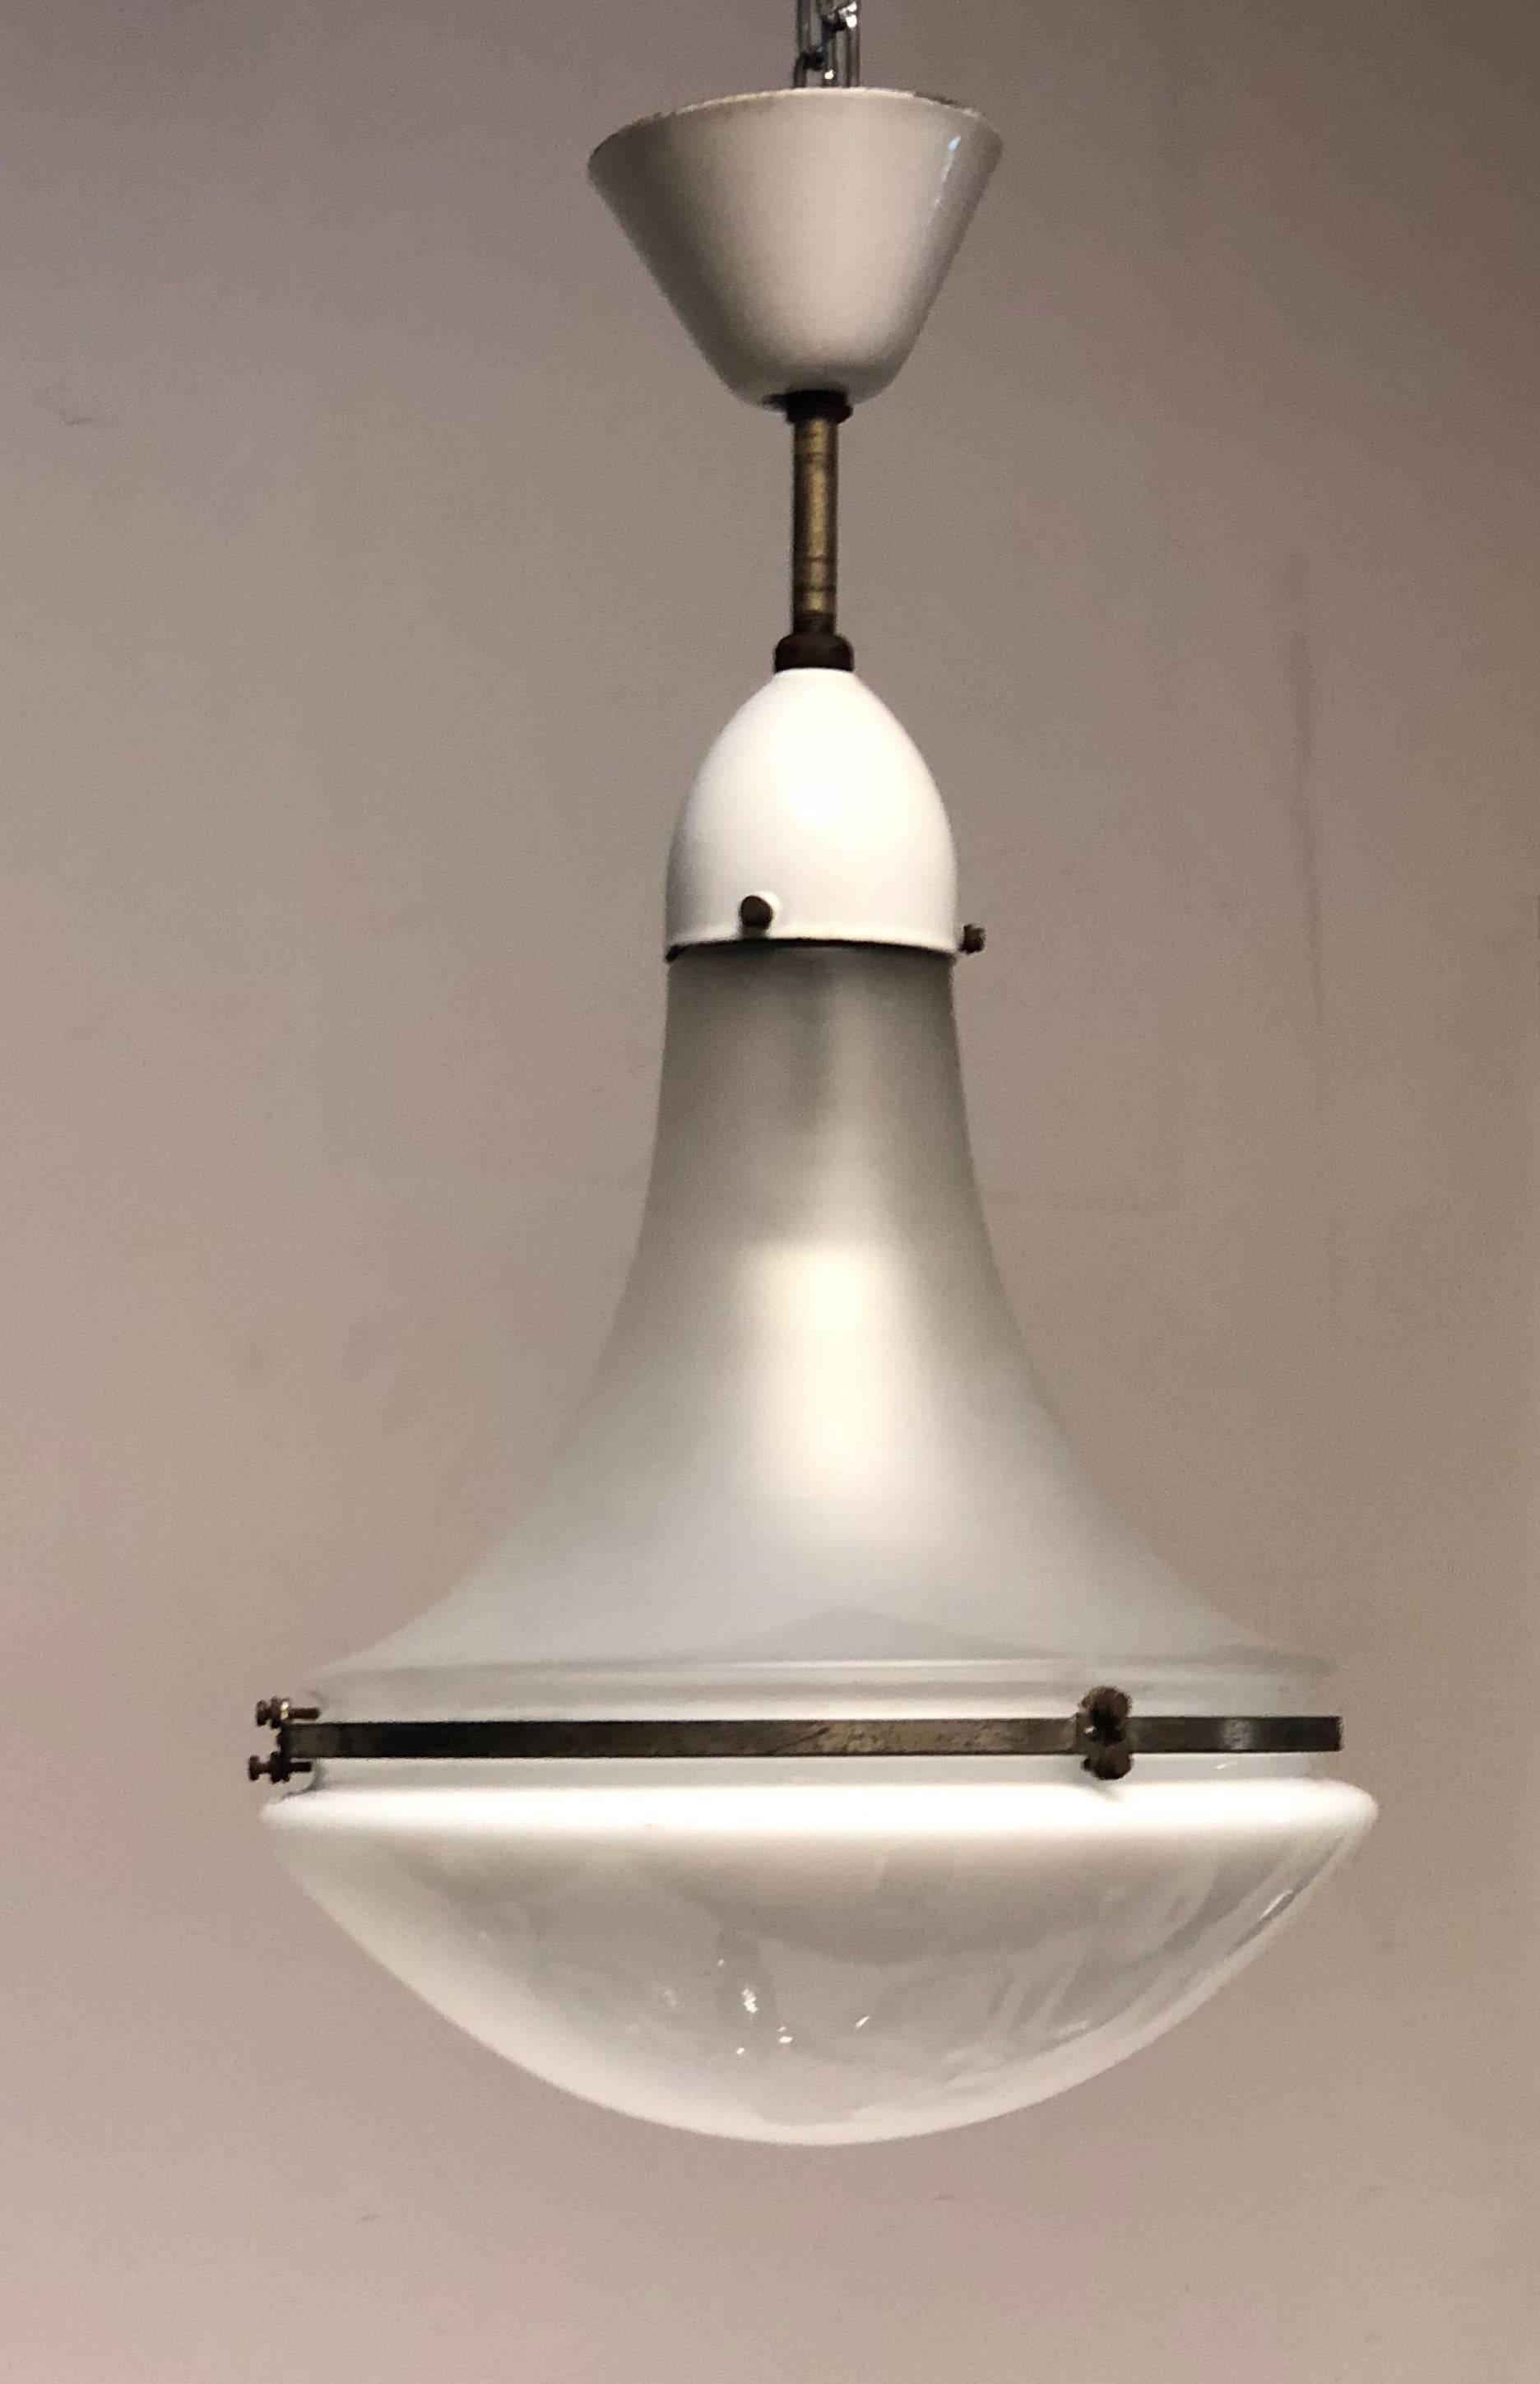 Steel with white enamel, fitted with one E27 porcelain socket up to 100W. Upper shade clear glass satin finish, lower part opaline glass. Originally designed by Peter Behrens for AEG this one was made in the 1930s.
Measure: It is the bigger one